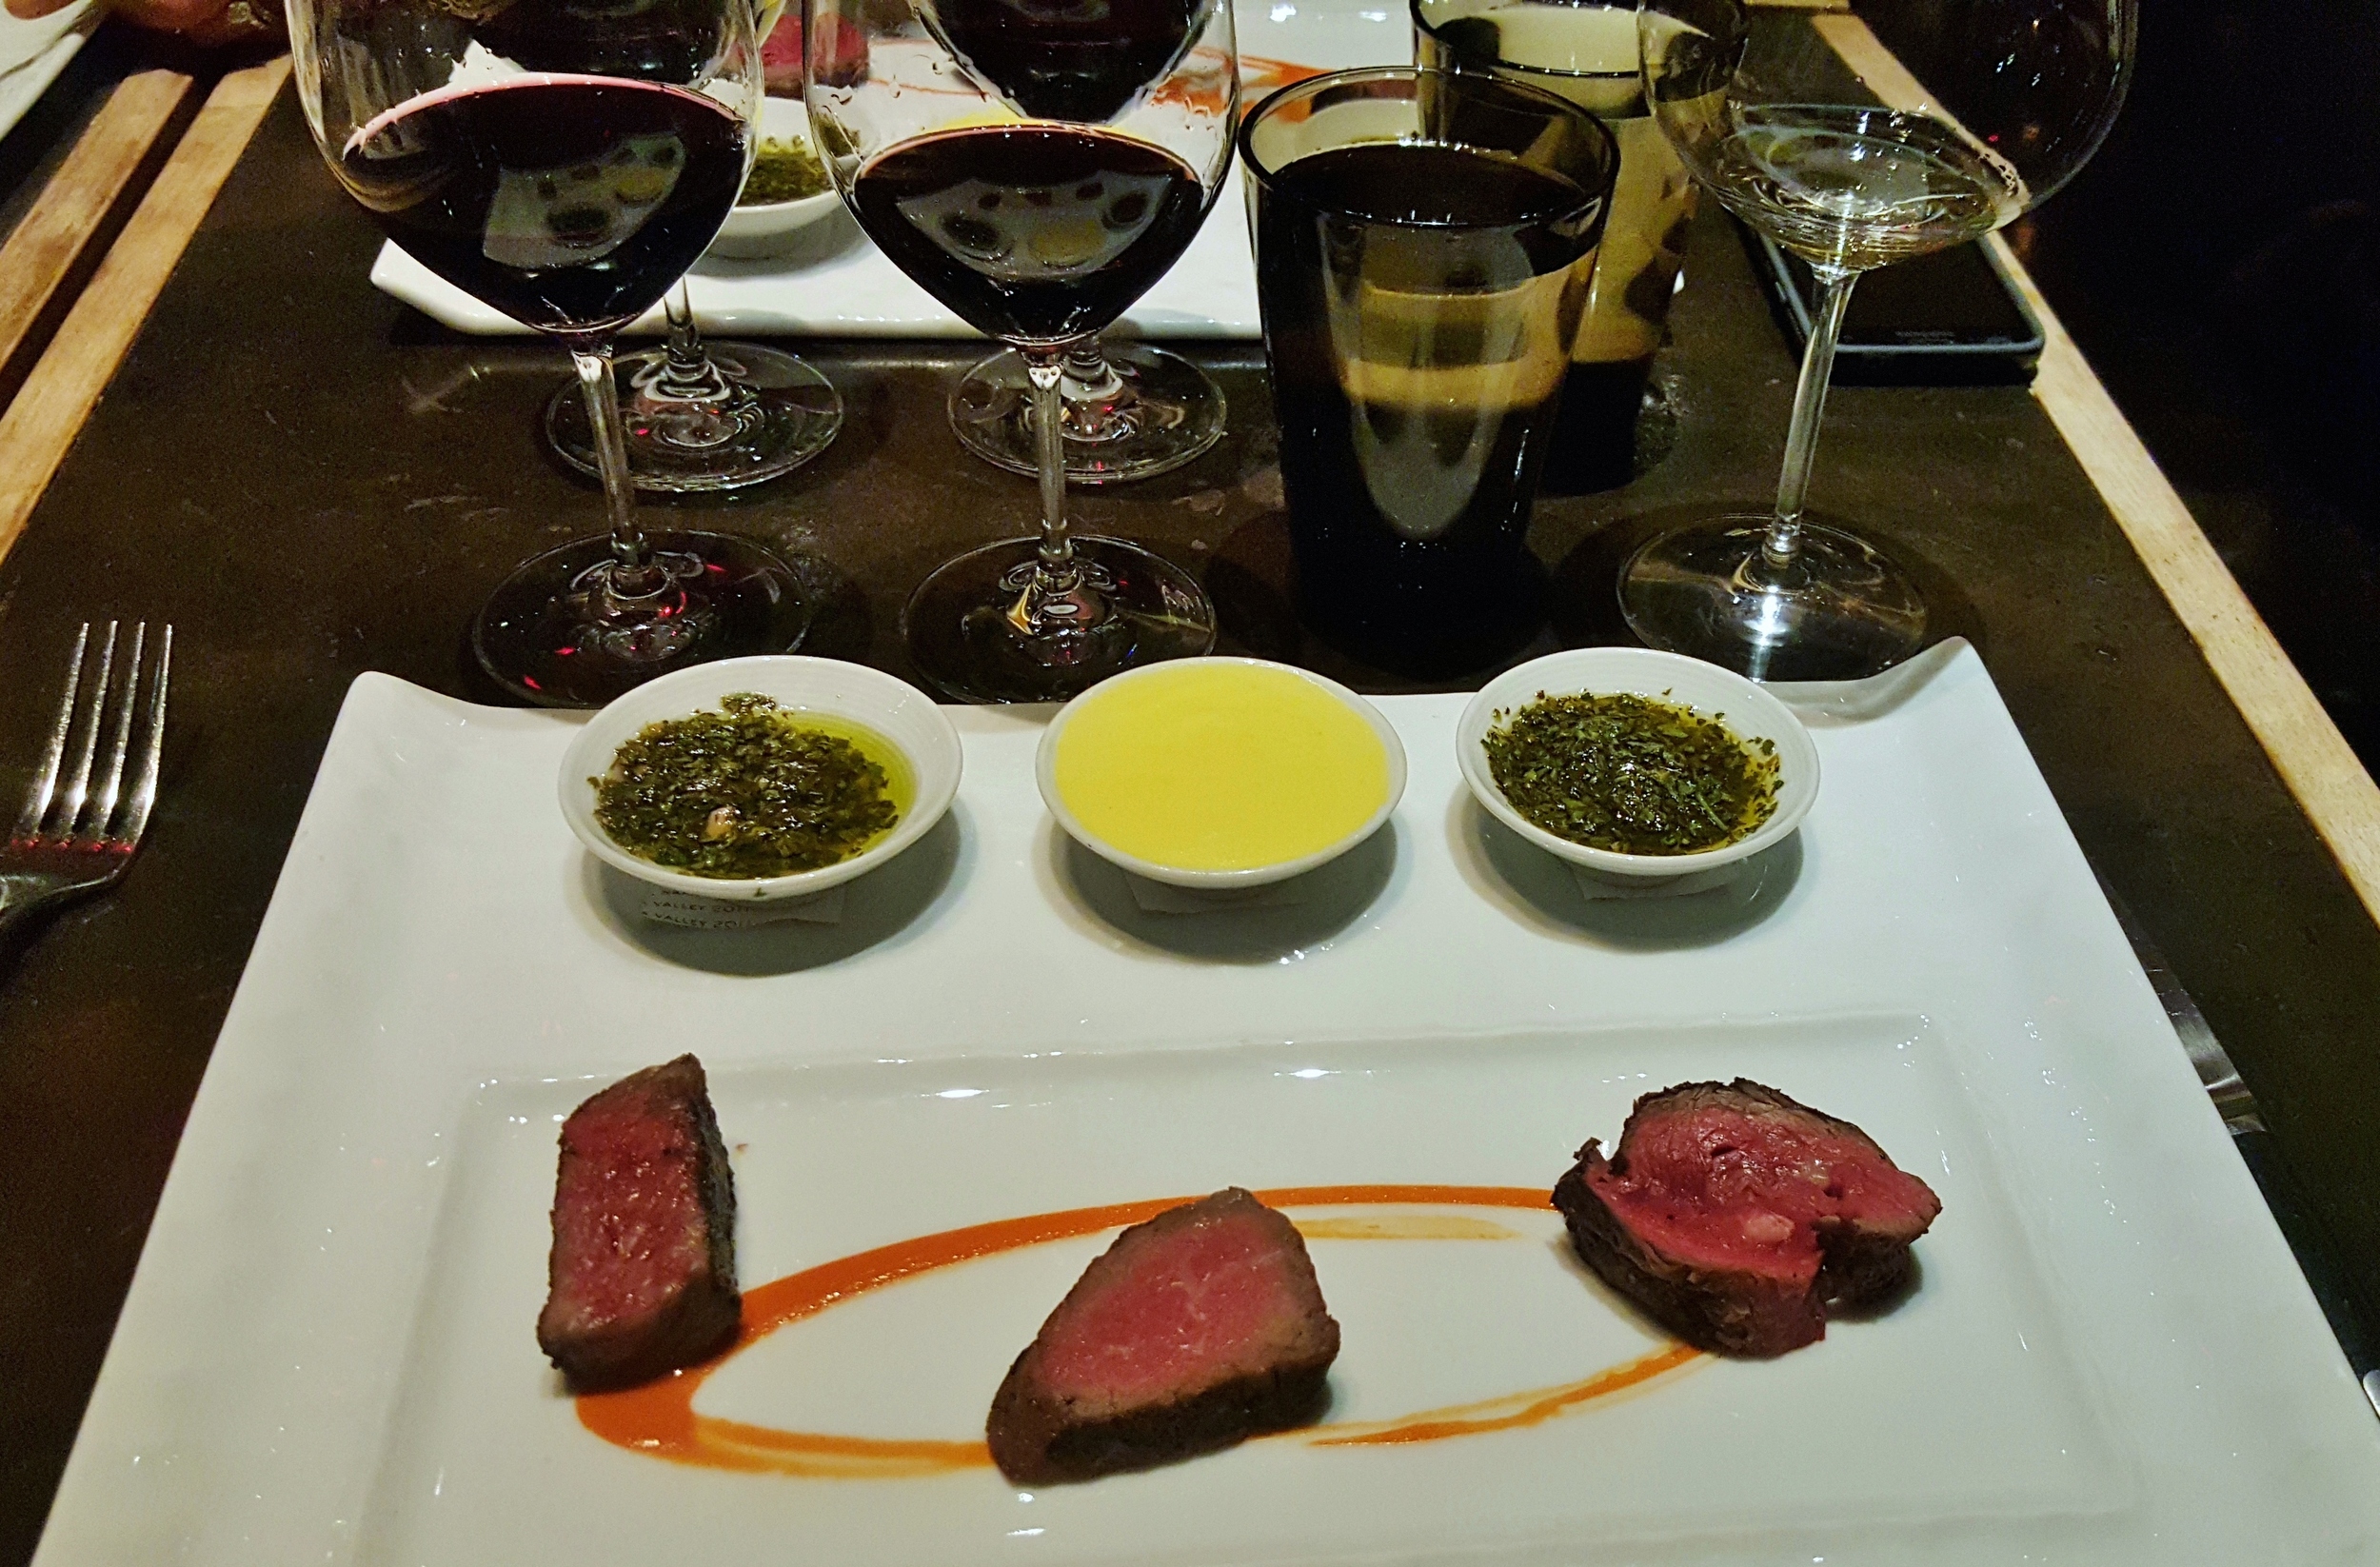 Beef trio: Wagyu A5, USDA prime, and sirloin cap. With chimichurri, bearnaise, and salsa verde. 